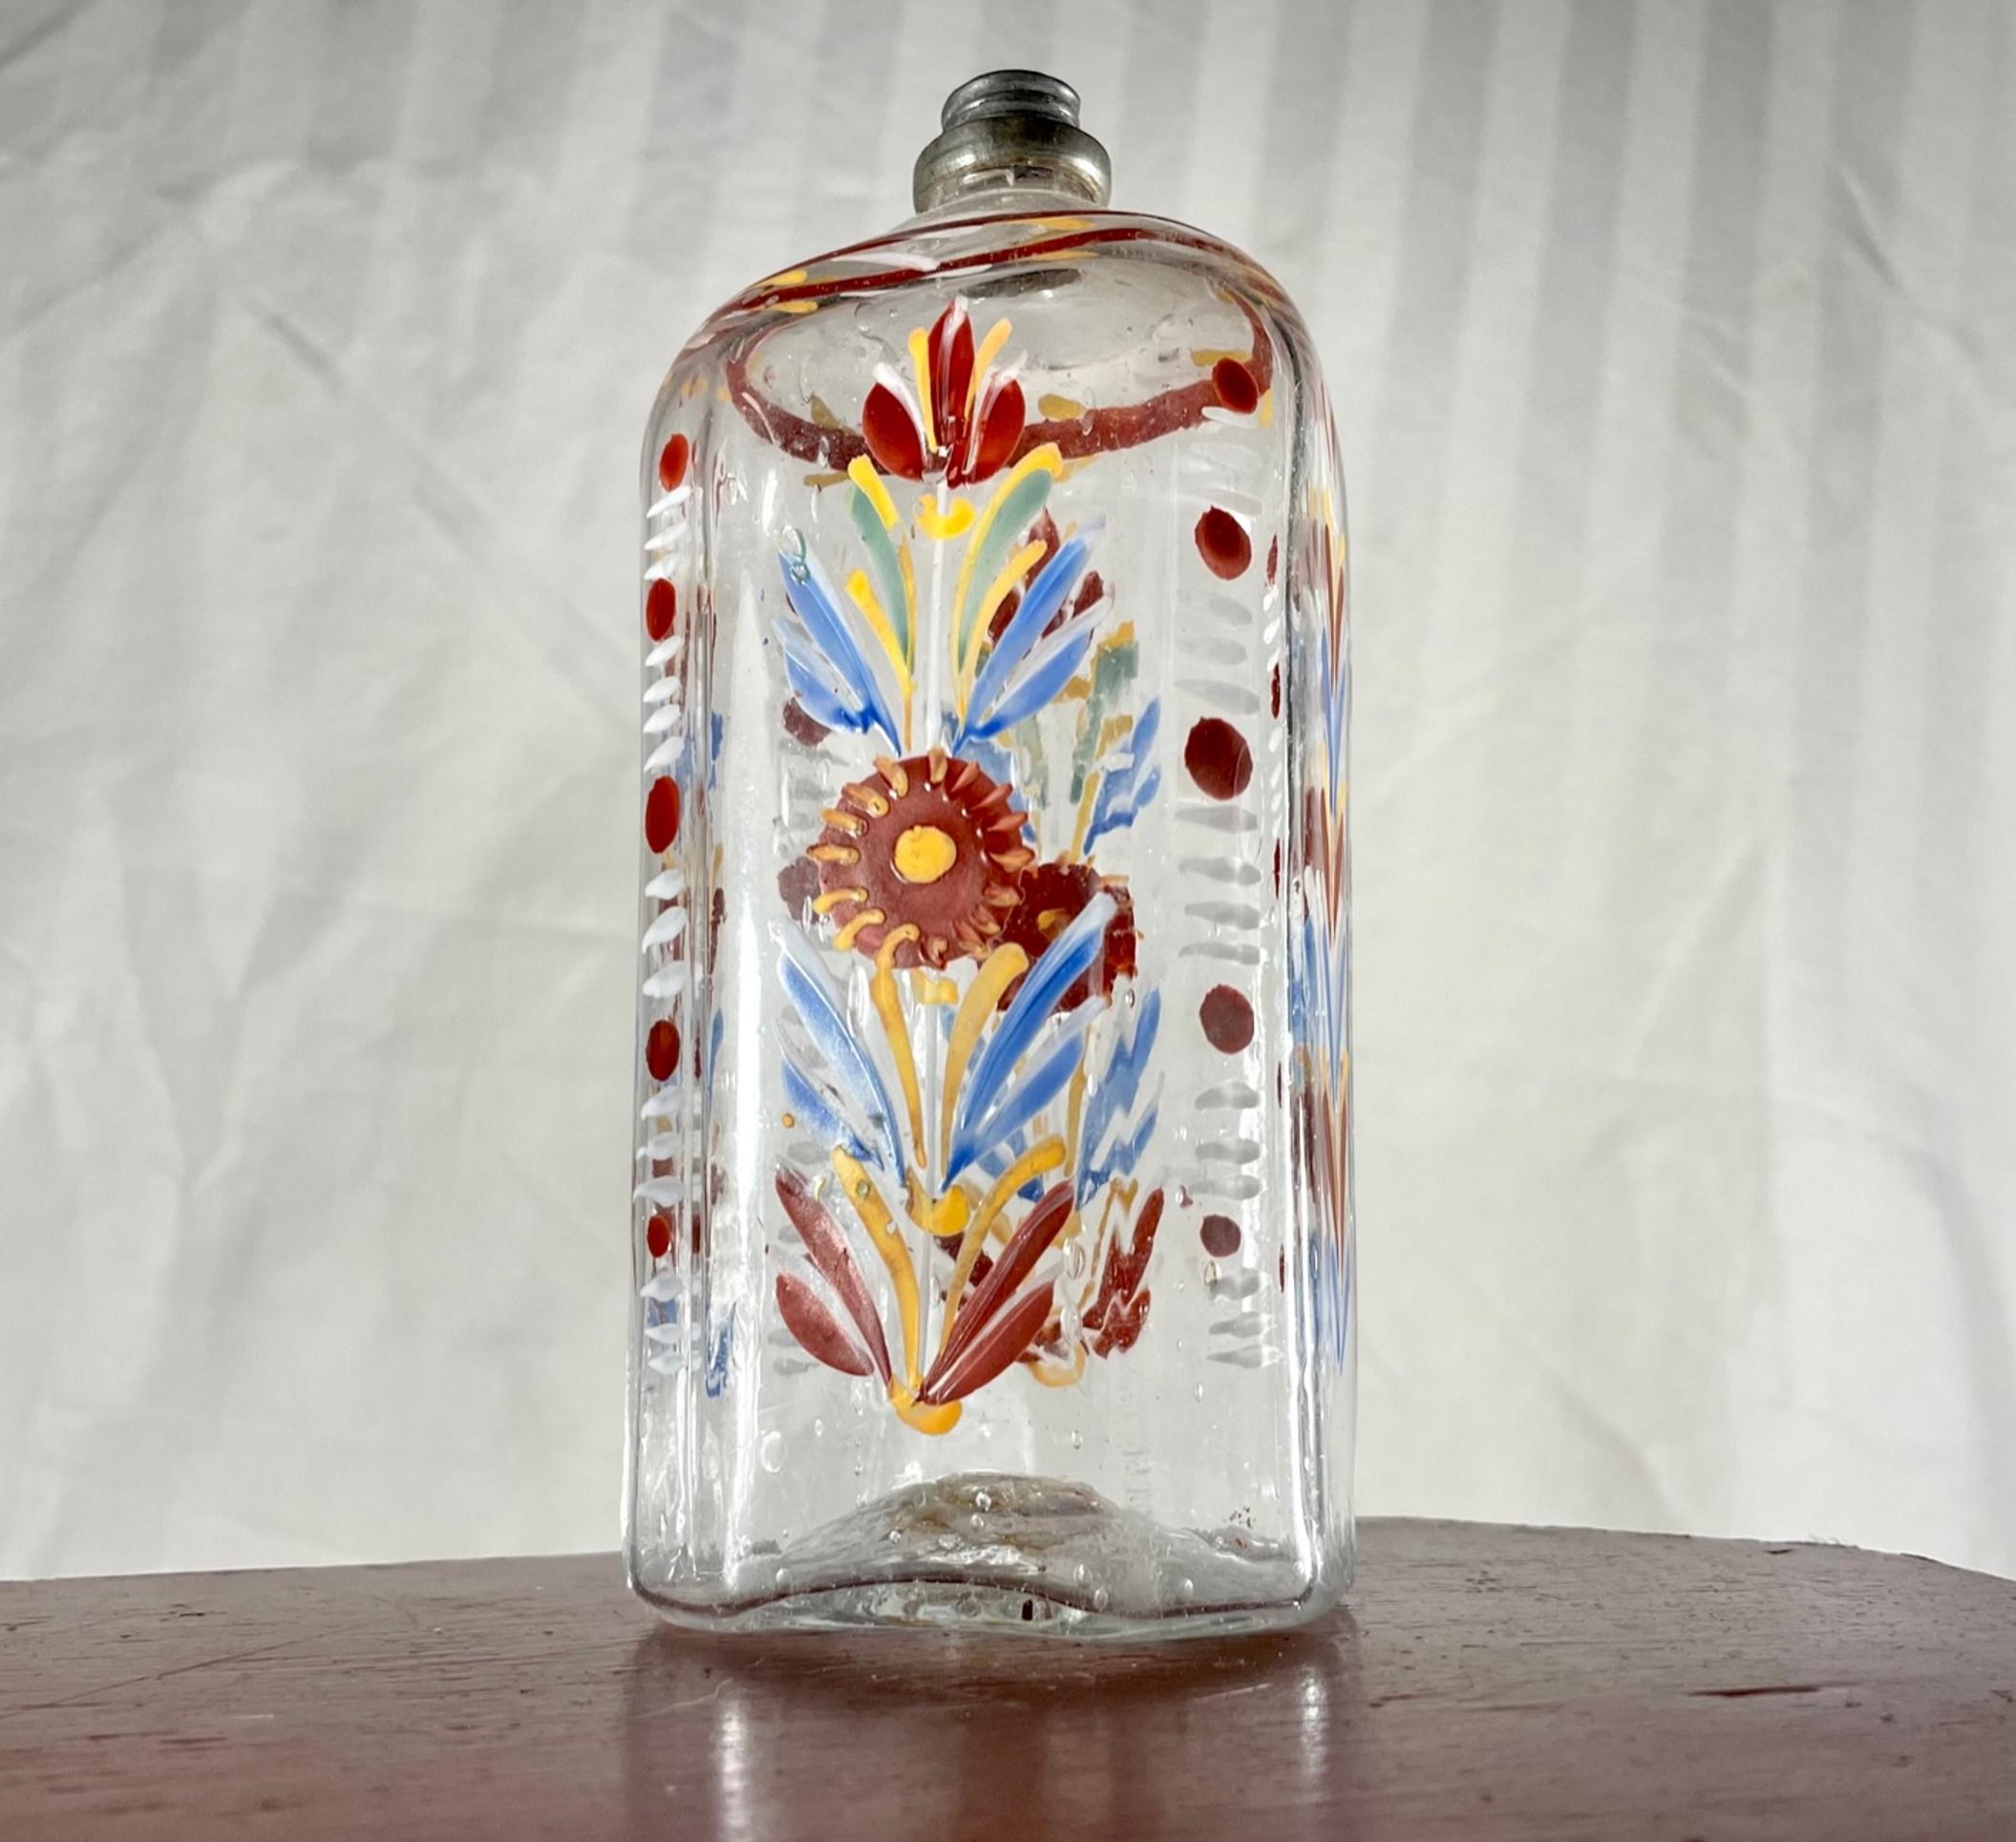 18th Century Blown Glass Enameled Stiegel Type Flask.

Folk art hand blown, and hand enameled polychrome decorated Stiegel colorless glass flask. Origin is probably 18th century Bohemia.  The bottle has a rectangular base with cut corners and has a